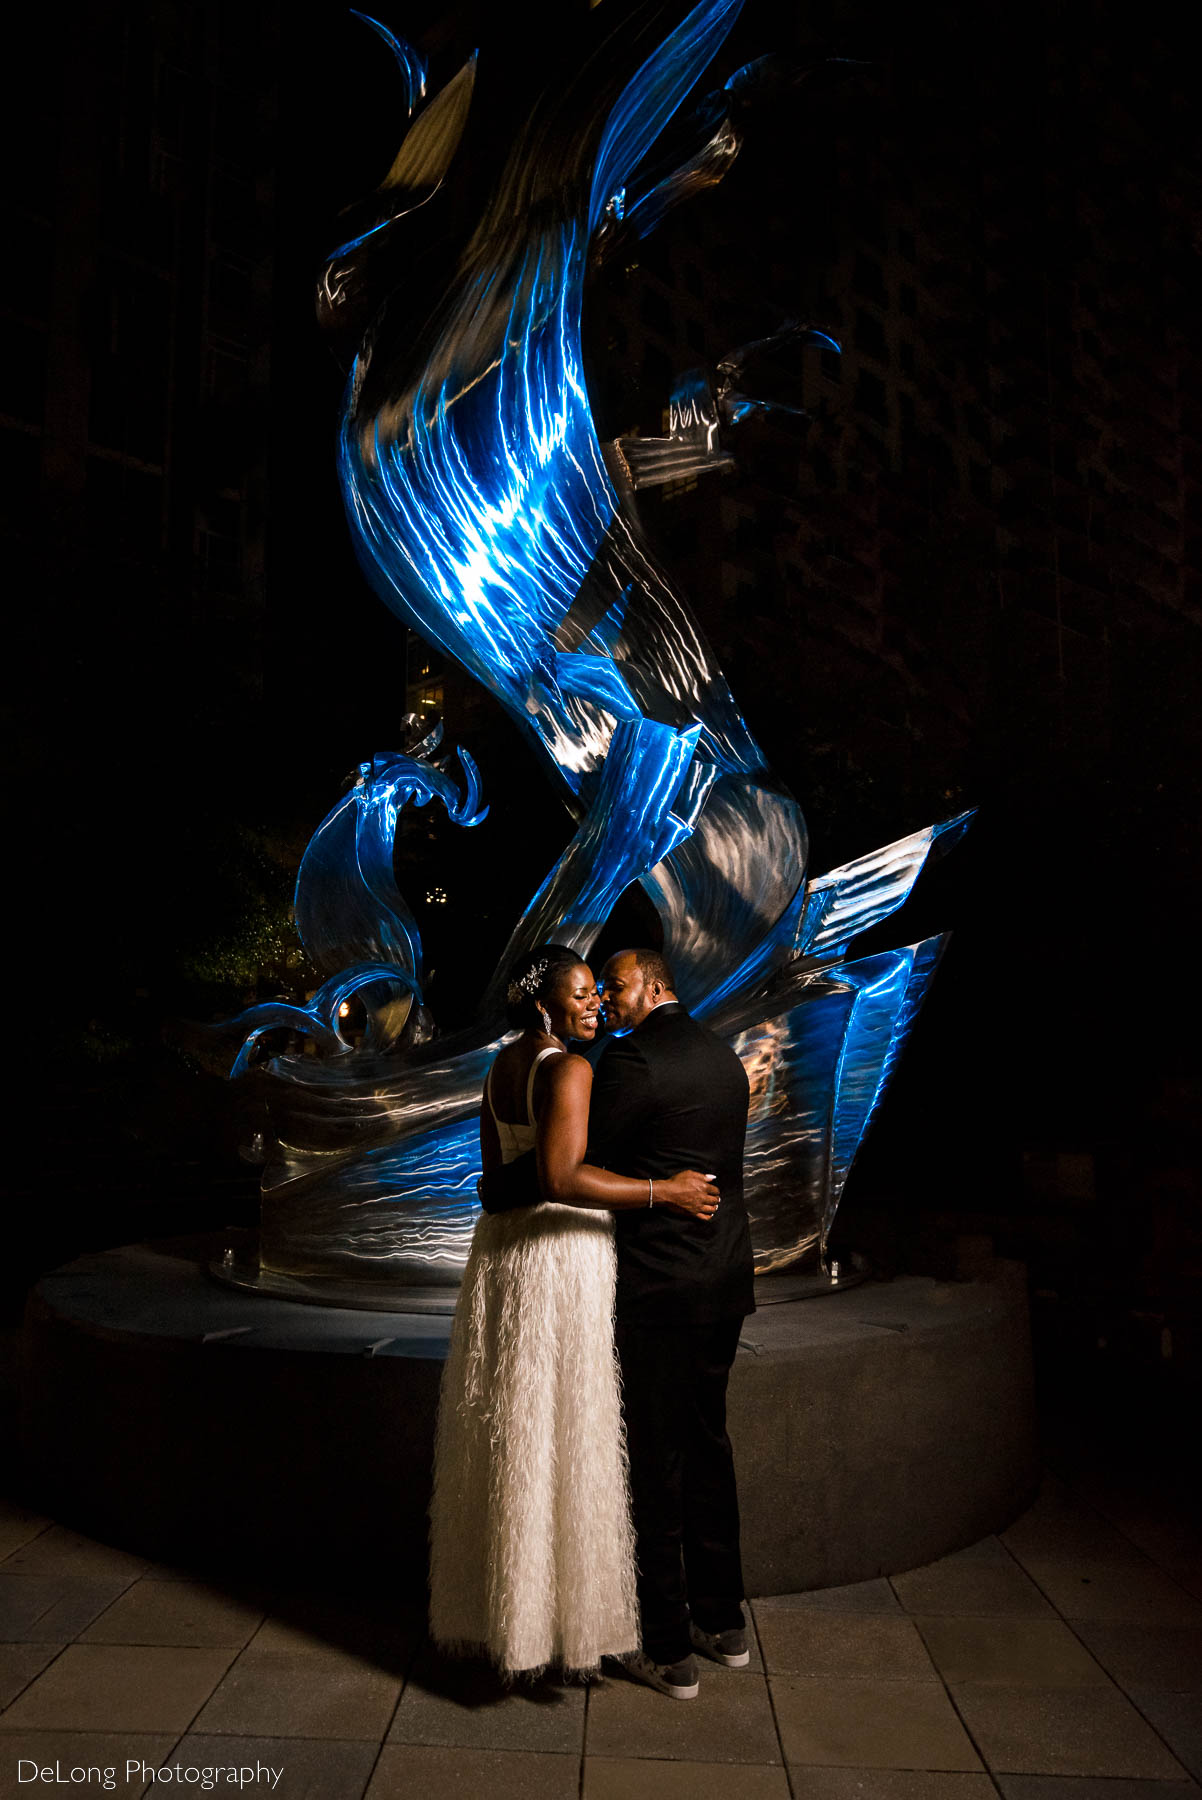 A portrait of a bride and groom where they are mostly turned away from the camera as the groom whispers in the bride's ear making her laugh in front of a blue-lit sculpture at Romare Bearden Park in Uptown Charlotte, NC by Charlotte wedding photographers DeLong Photography